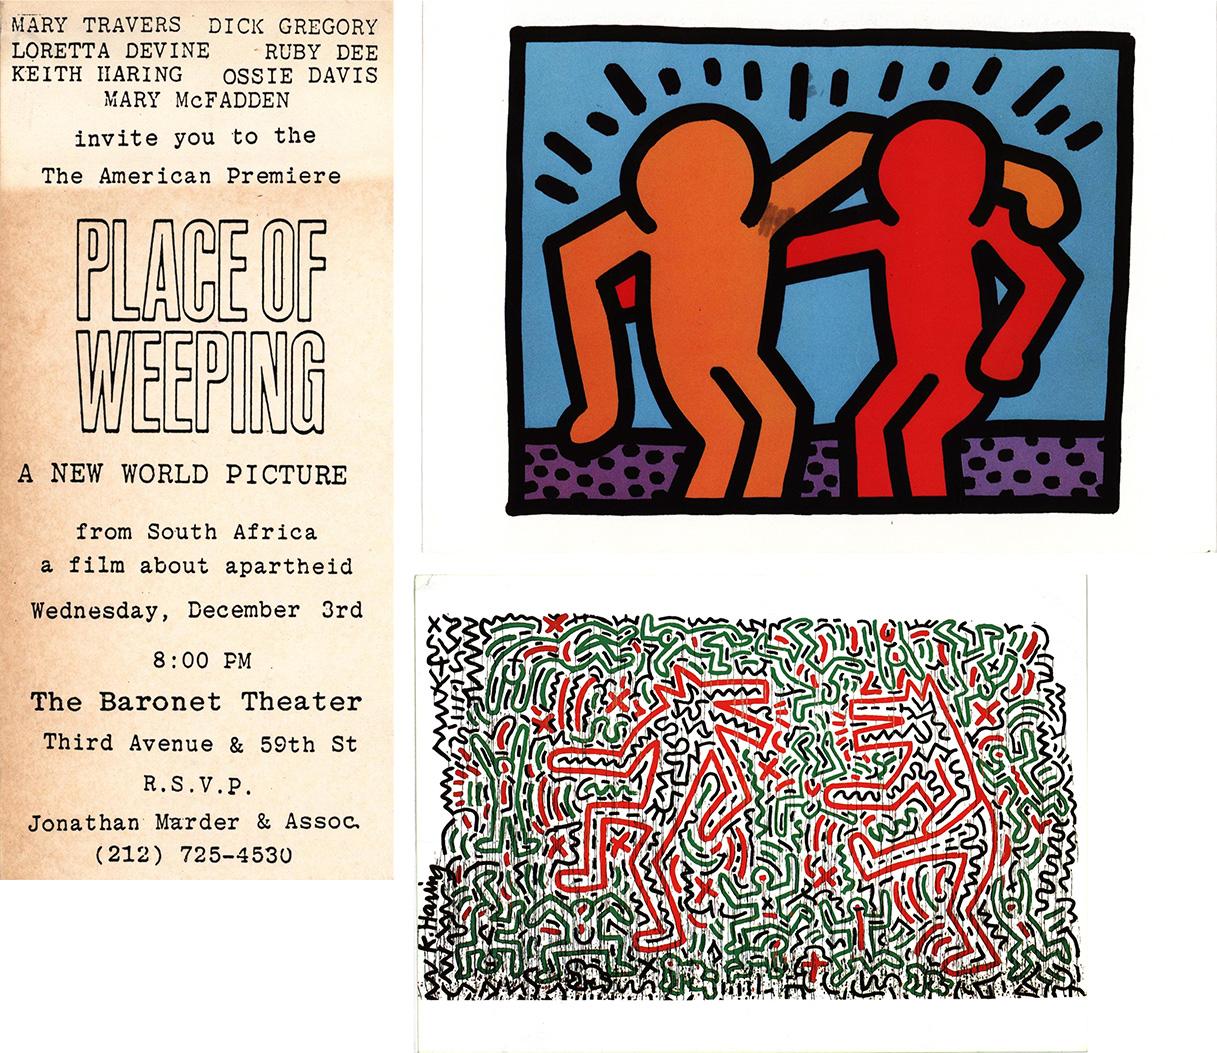 Keith Haring 1980's/1990s ephemera collection (Keith Haring pop shop) For Sale 1